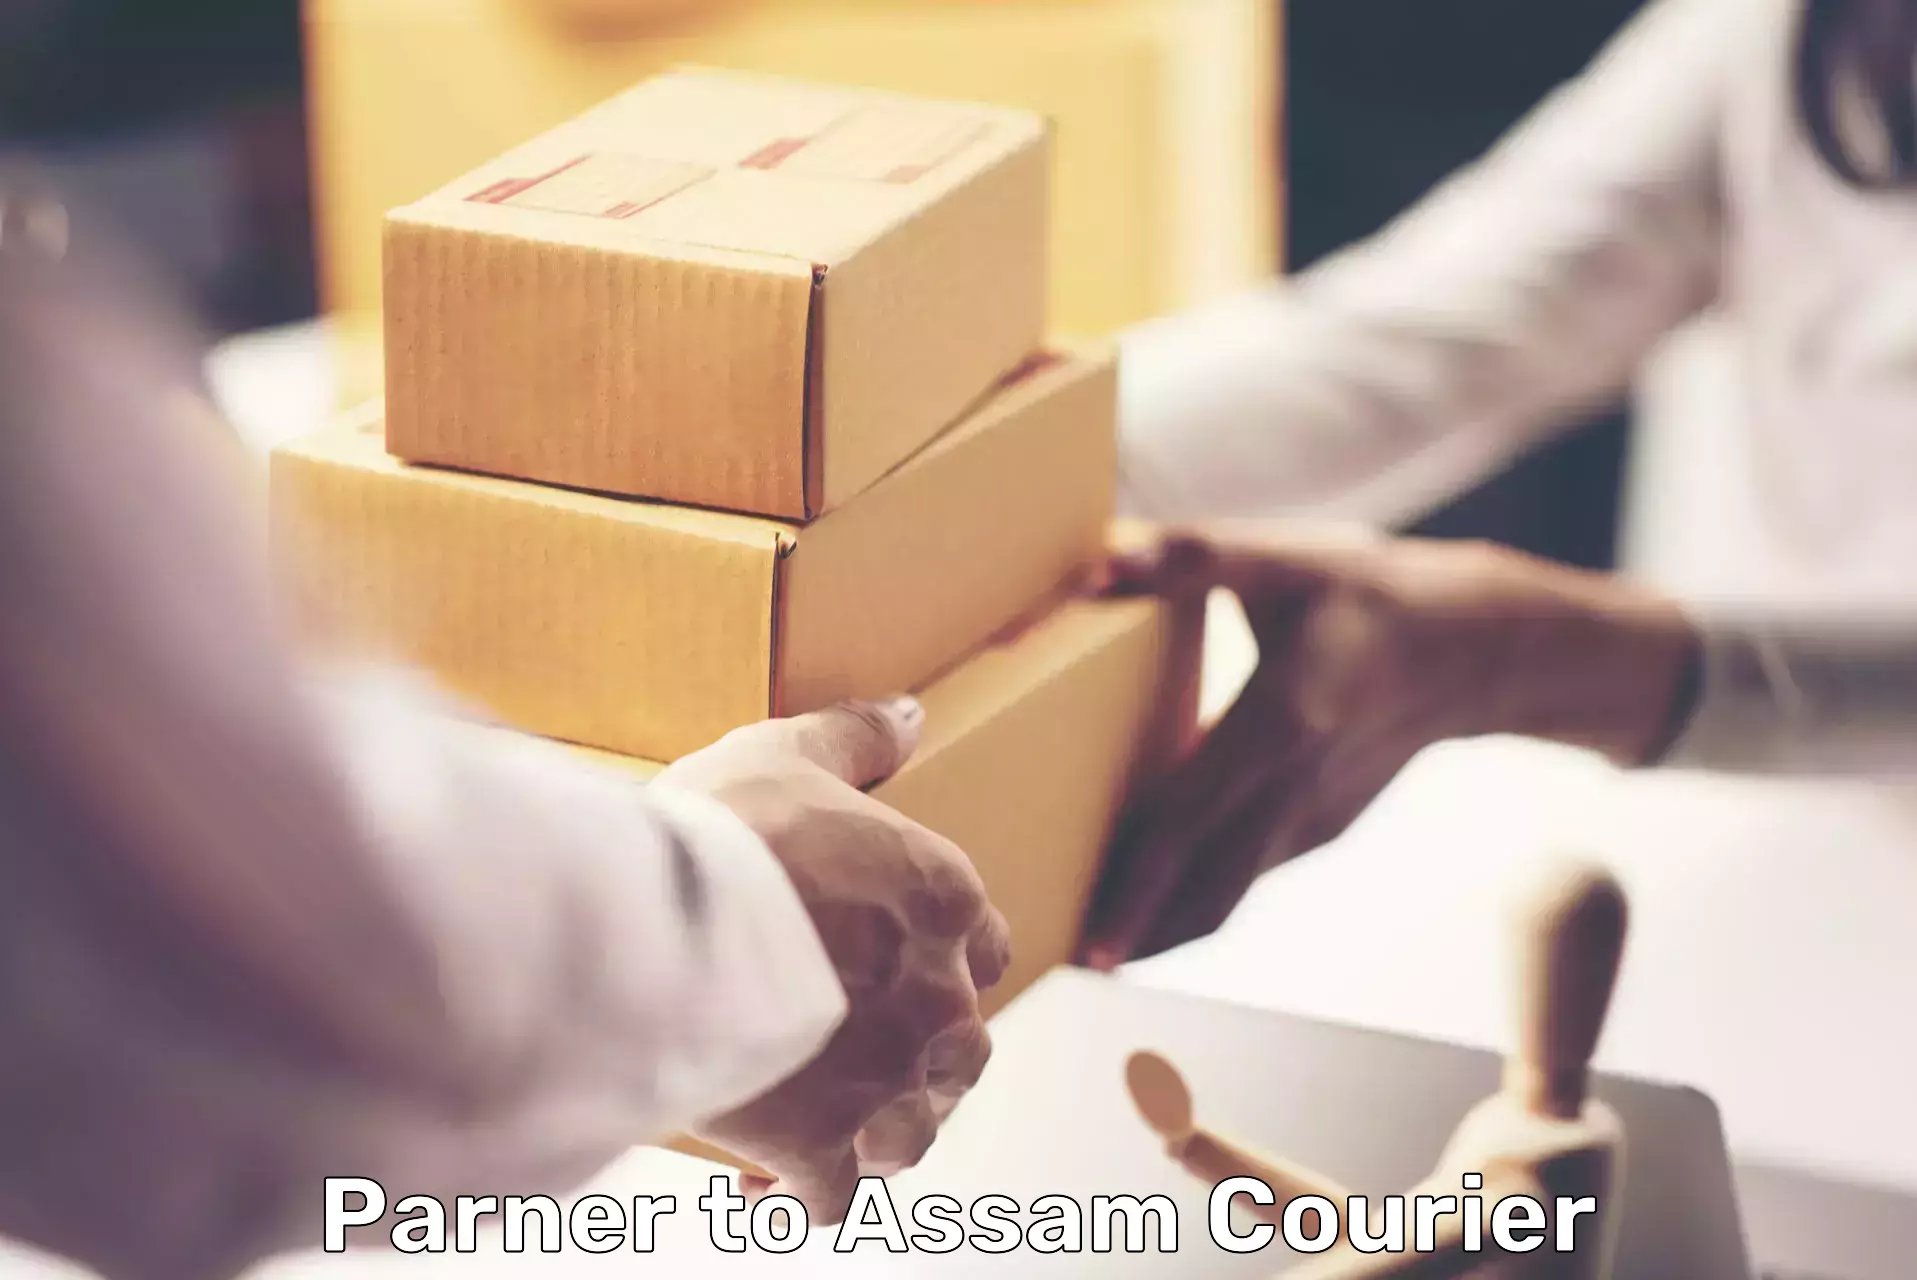 Parcel handling and care in Parner to Sonitpur